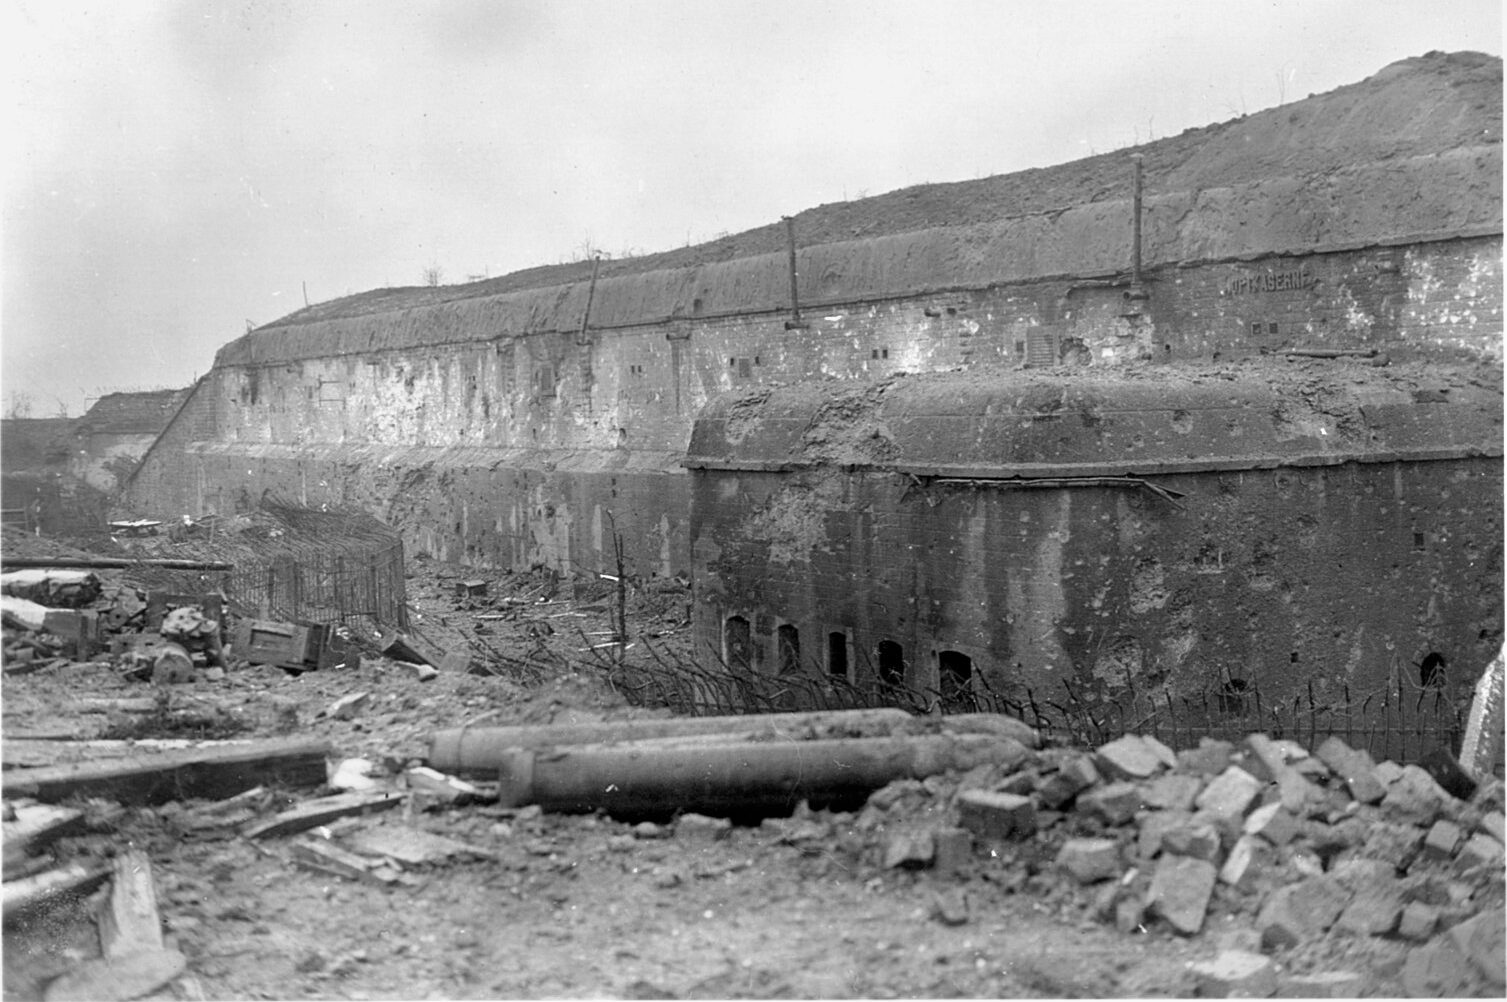 After the battle, the reinforced concrete walls of Fort Driant show the effects of shells and bombs but have not been breached. The fort did not fall until December 8, 1944.